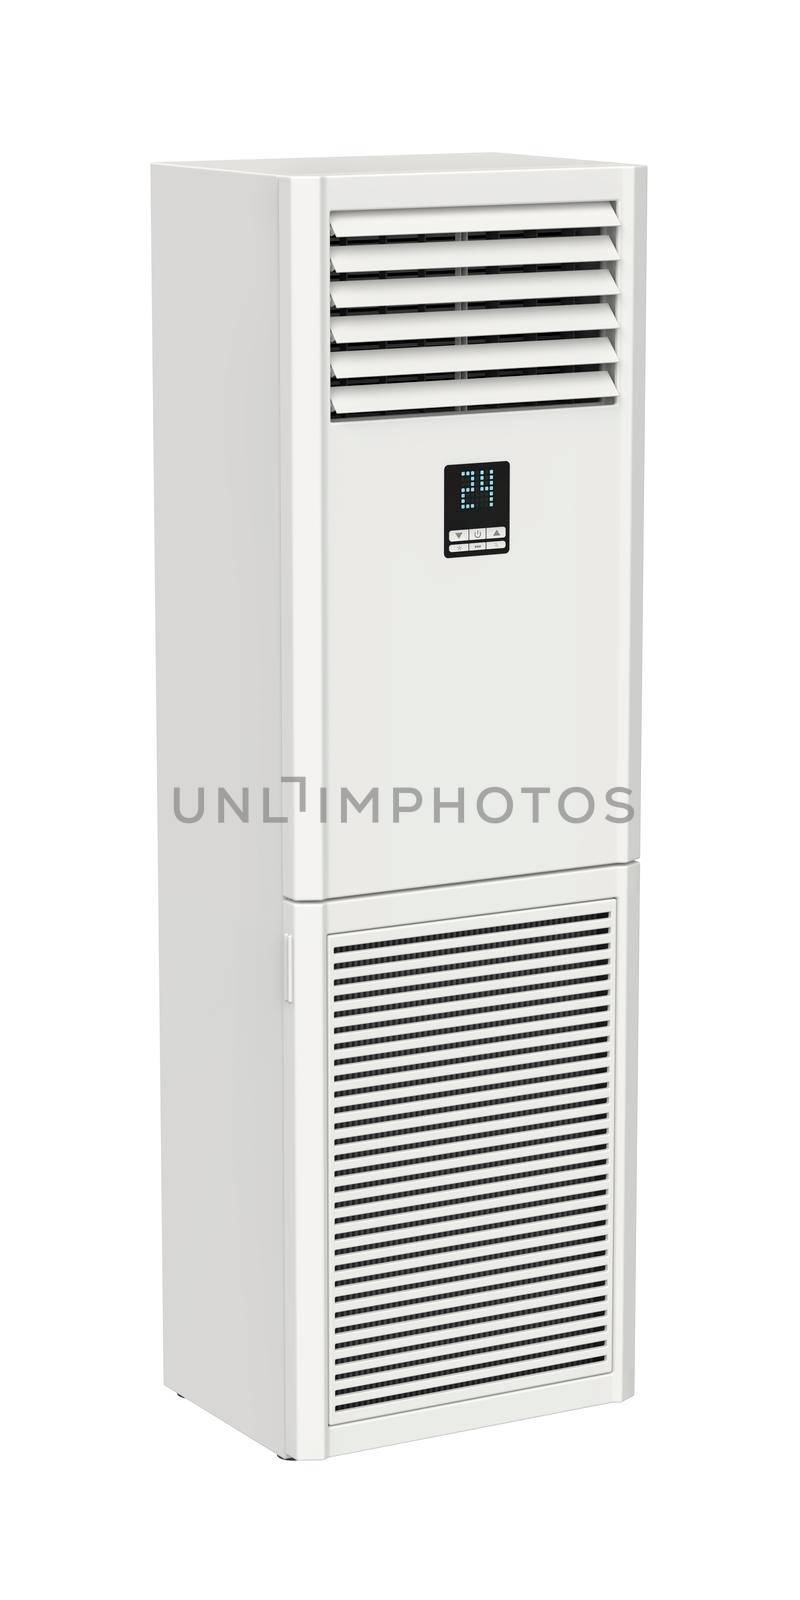 Floor standing air conditioner by magraphics